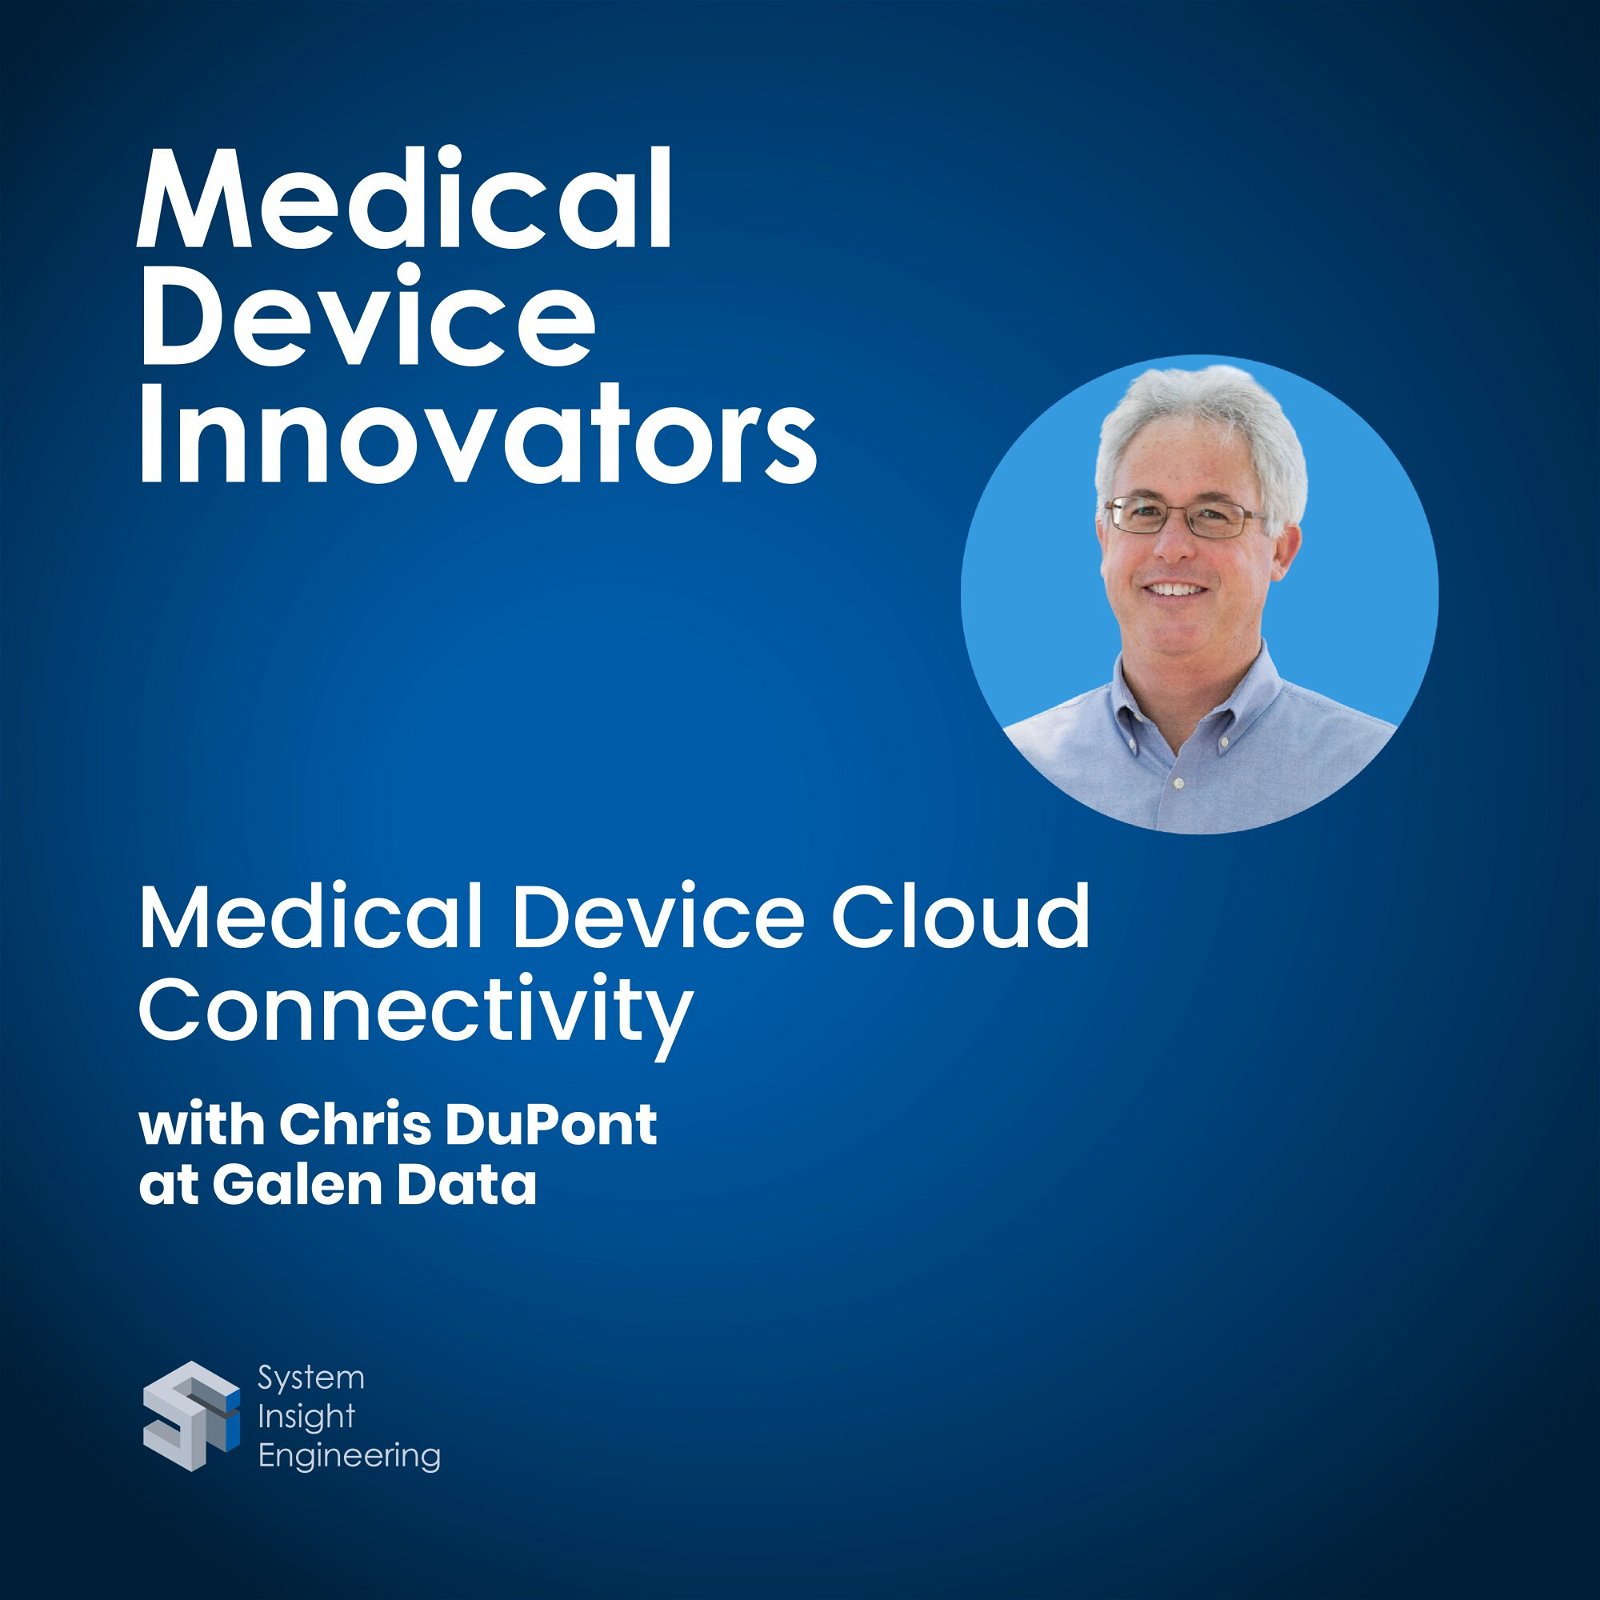 Medical Device Cloud Connectivity with Chris DuPont at Galen Data